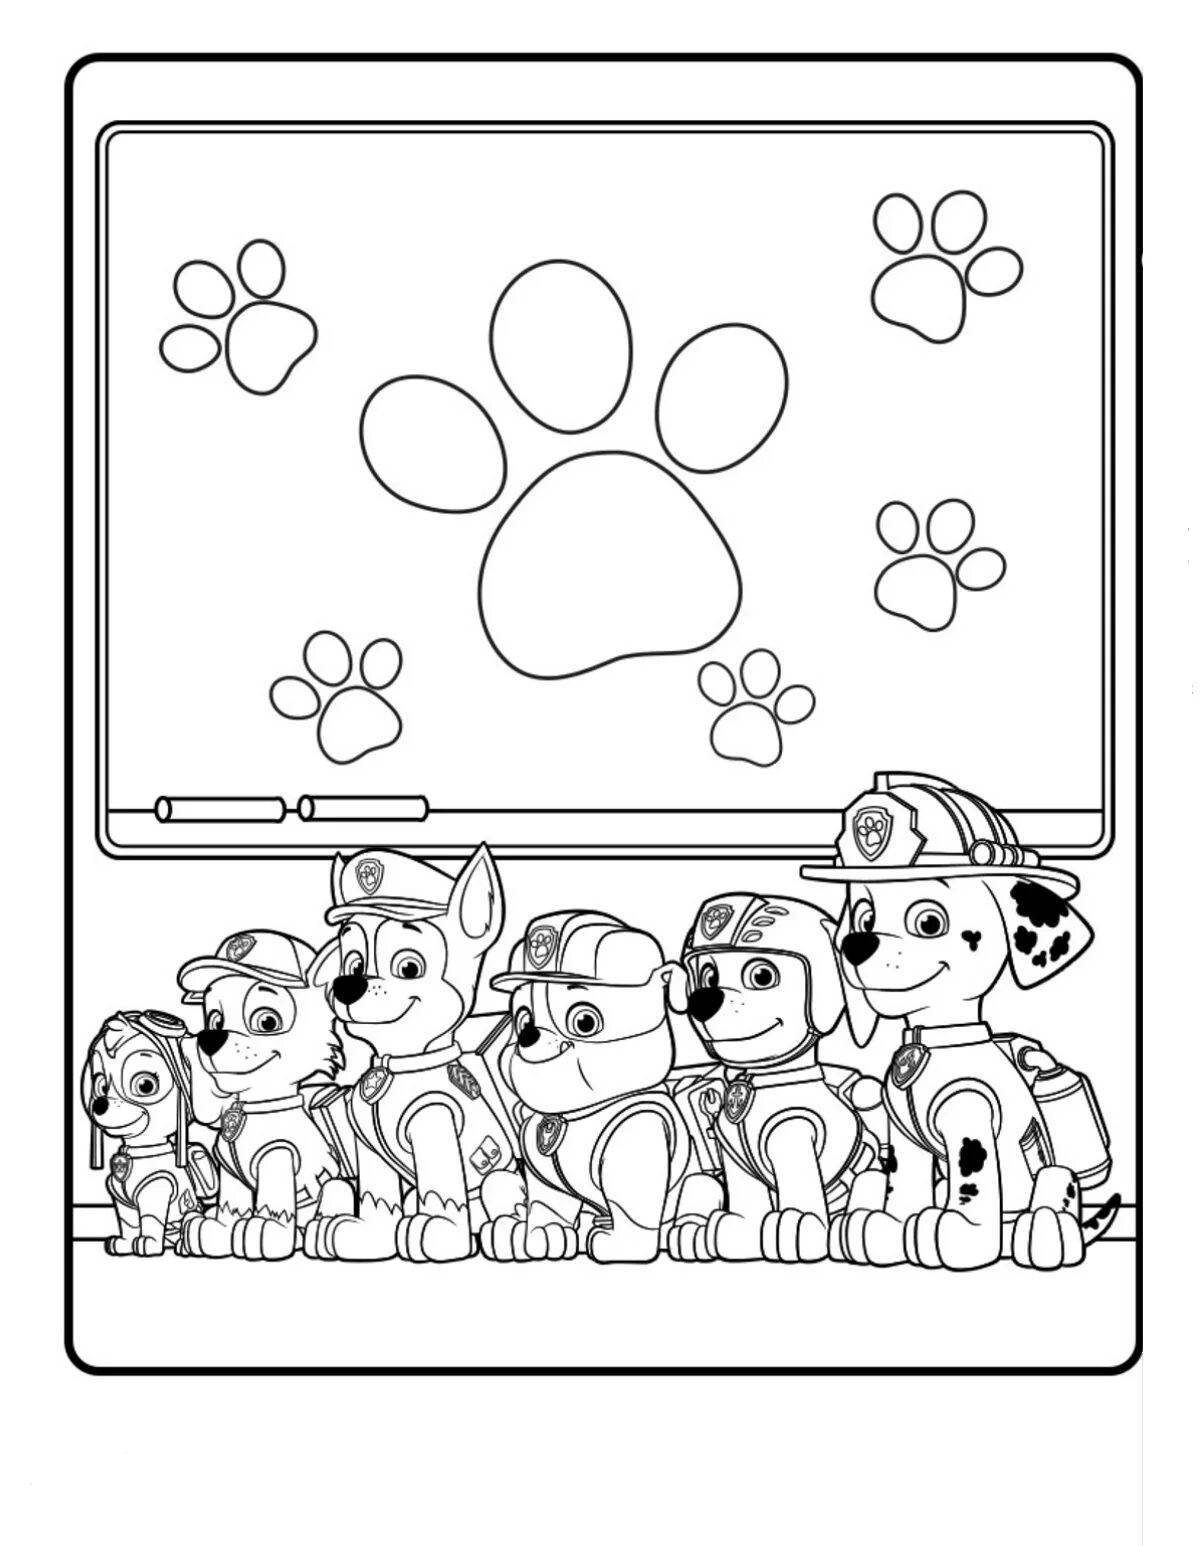 Gorgeous Paw Patrol coloring page